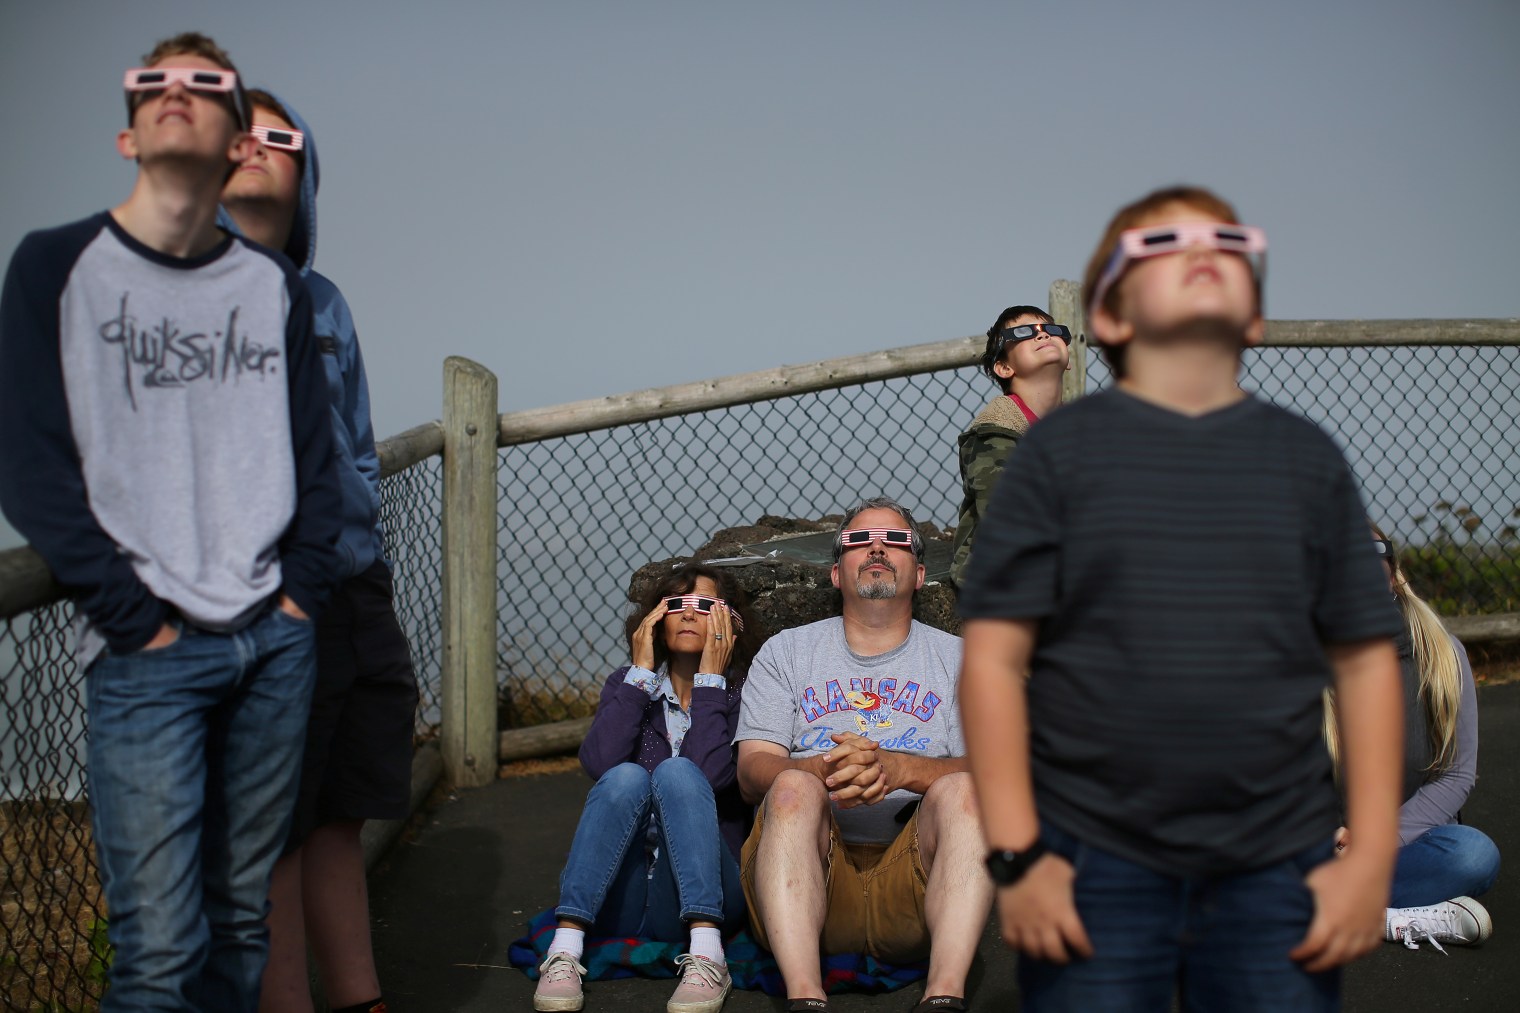 A boy uses solar viewing glasses as the sun emerges through fog cover before the solar eclipse in Depoe Bay, Oregon on Aug. 21, 2017.